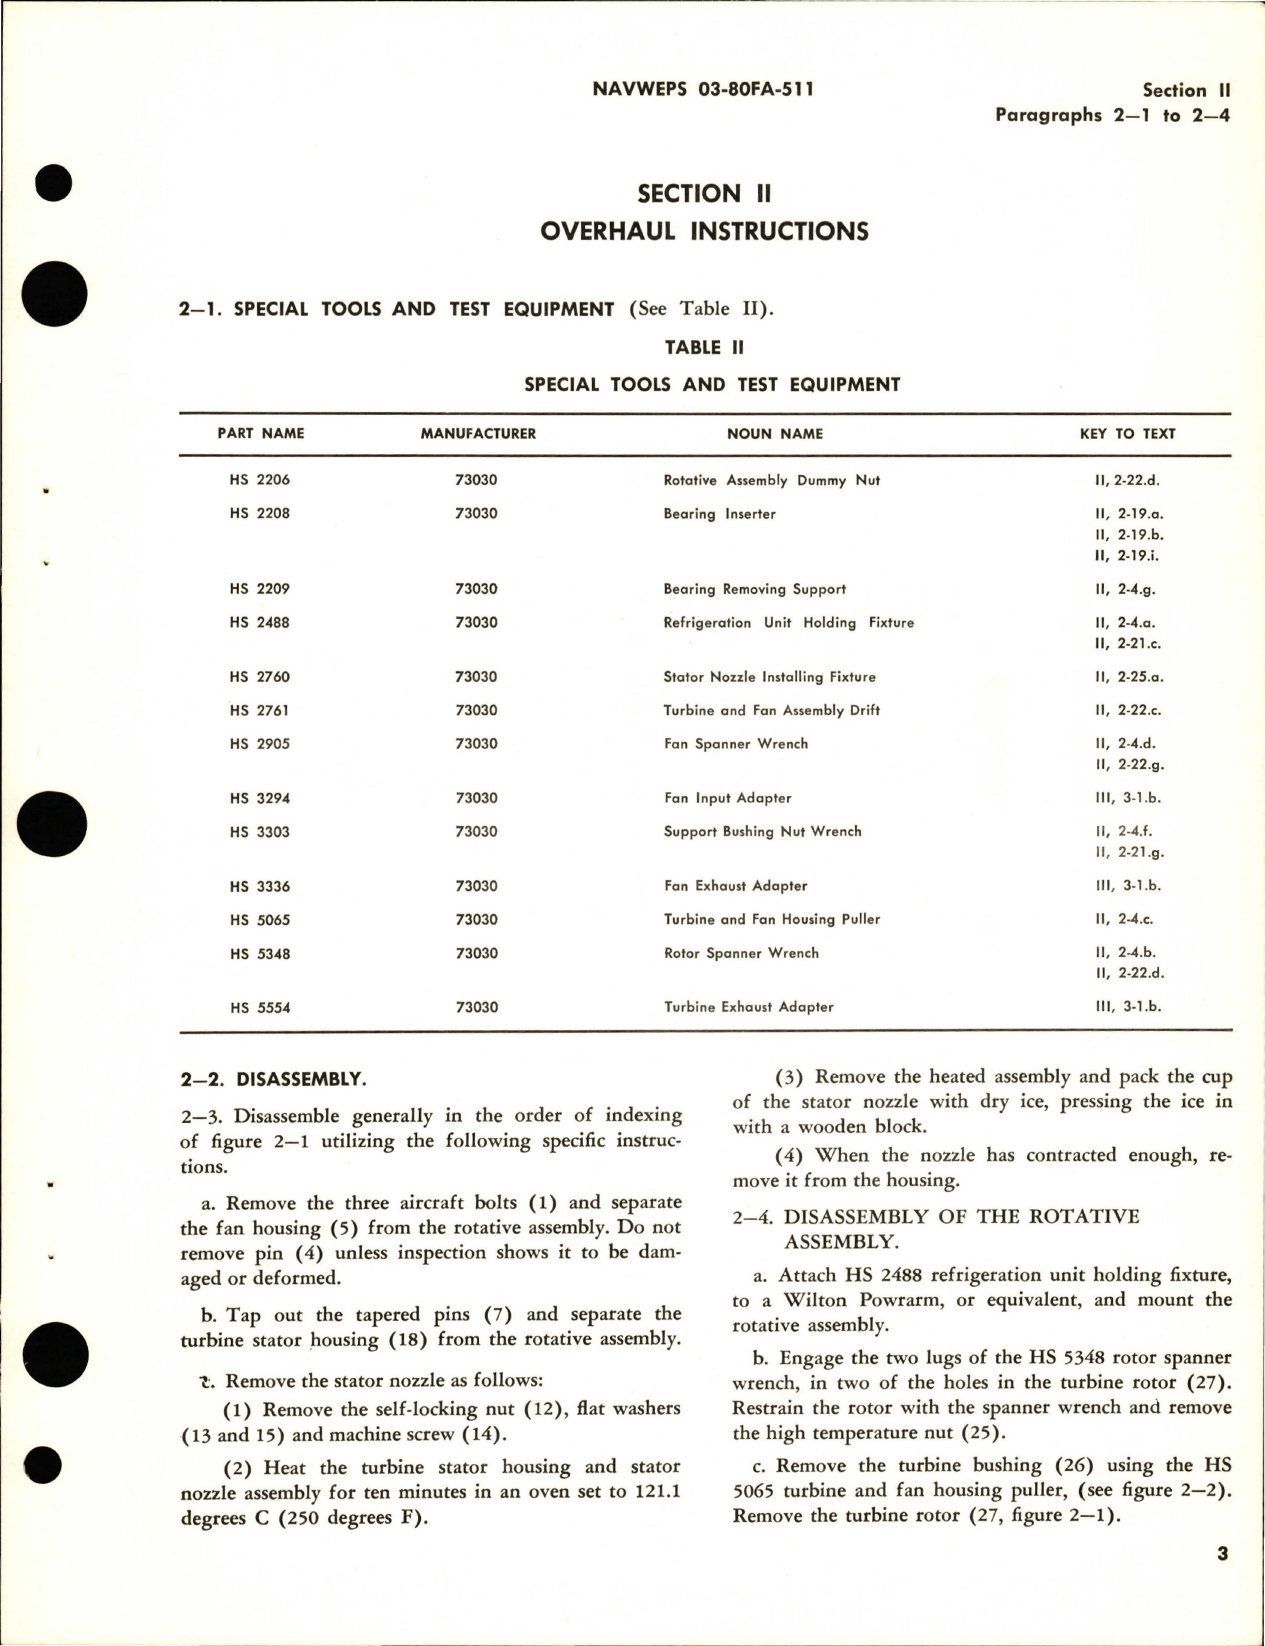 Sample page 7 from AirCorps Library document: Overhaul Instructions for Turbine Fan Assembly - Parts 505450-1 and 505450 